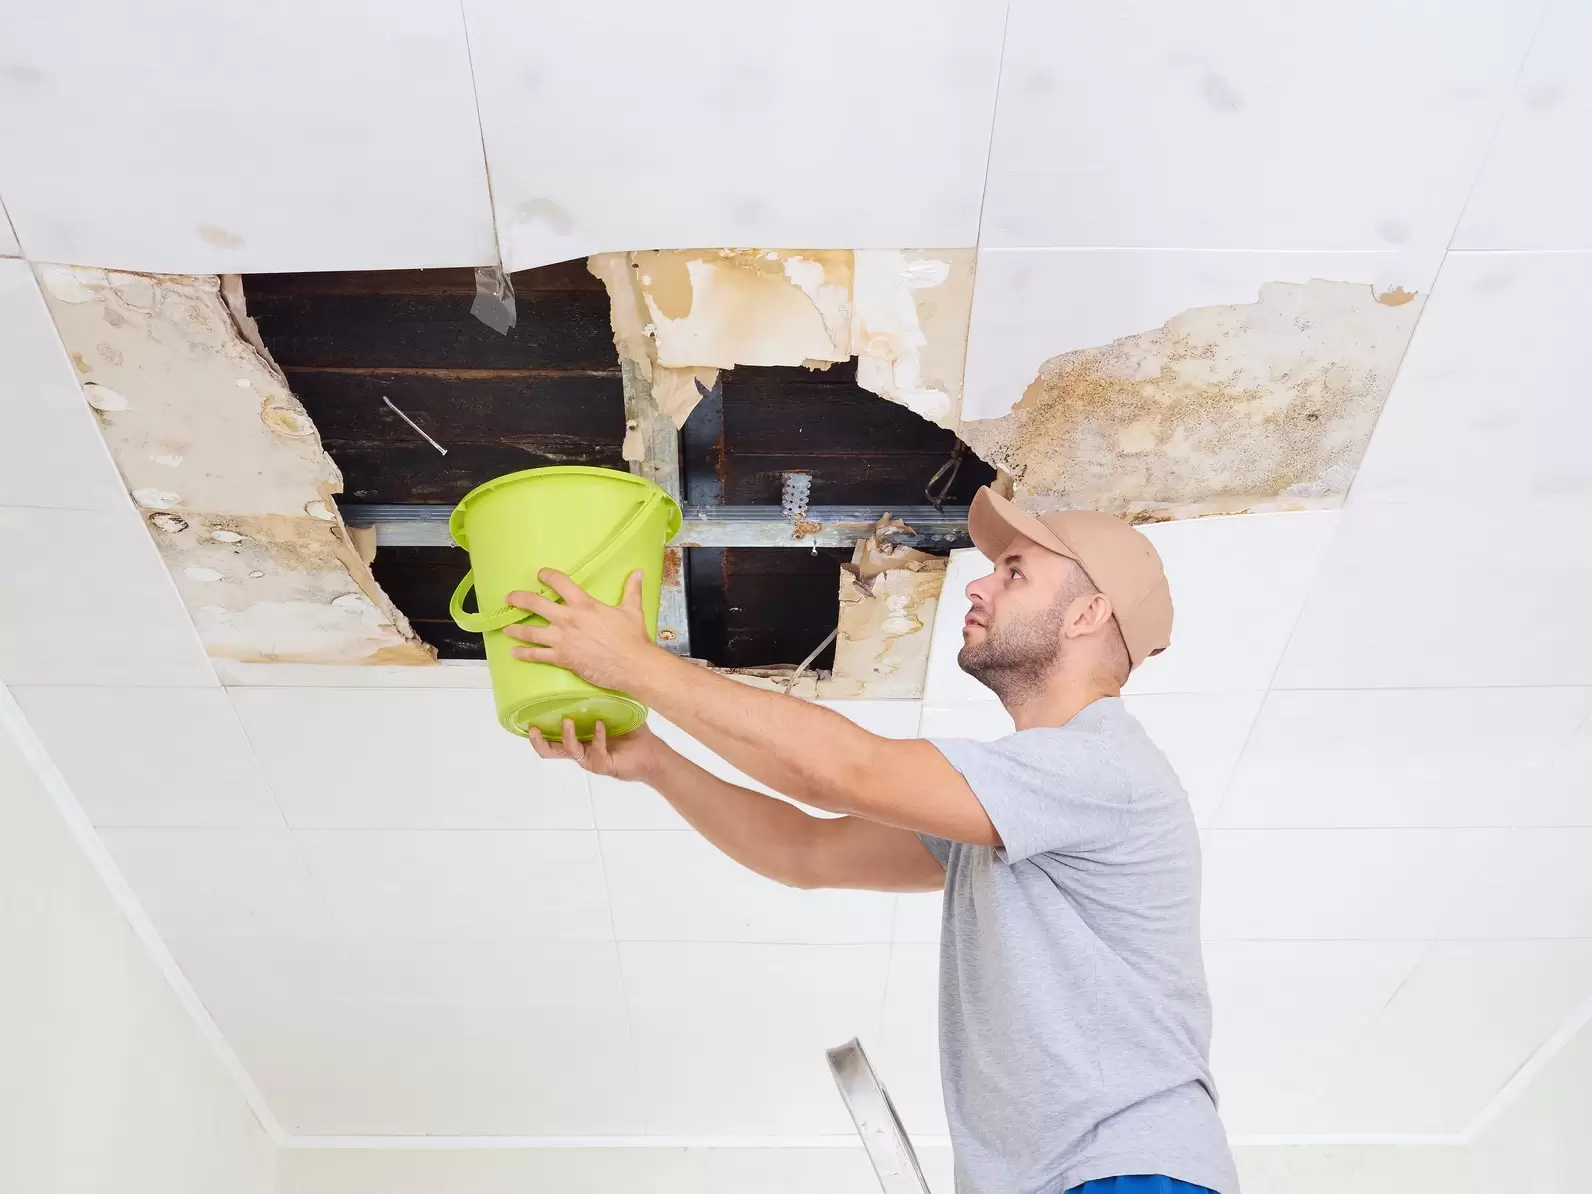 Should You Do Water Damage Cleanup Yourself Or Hire a Professional?